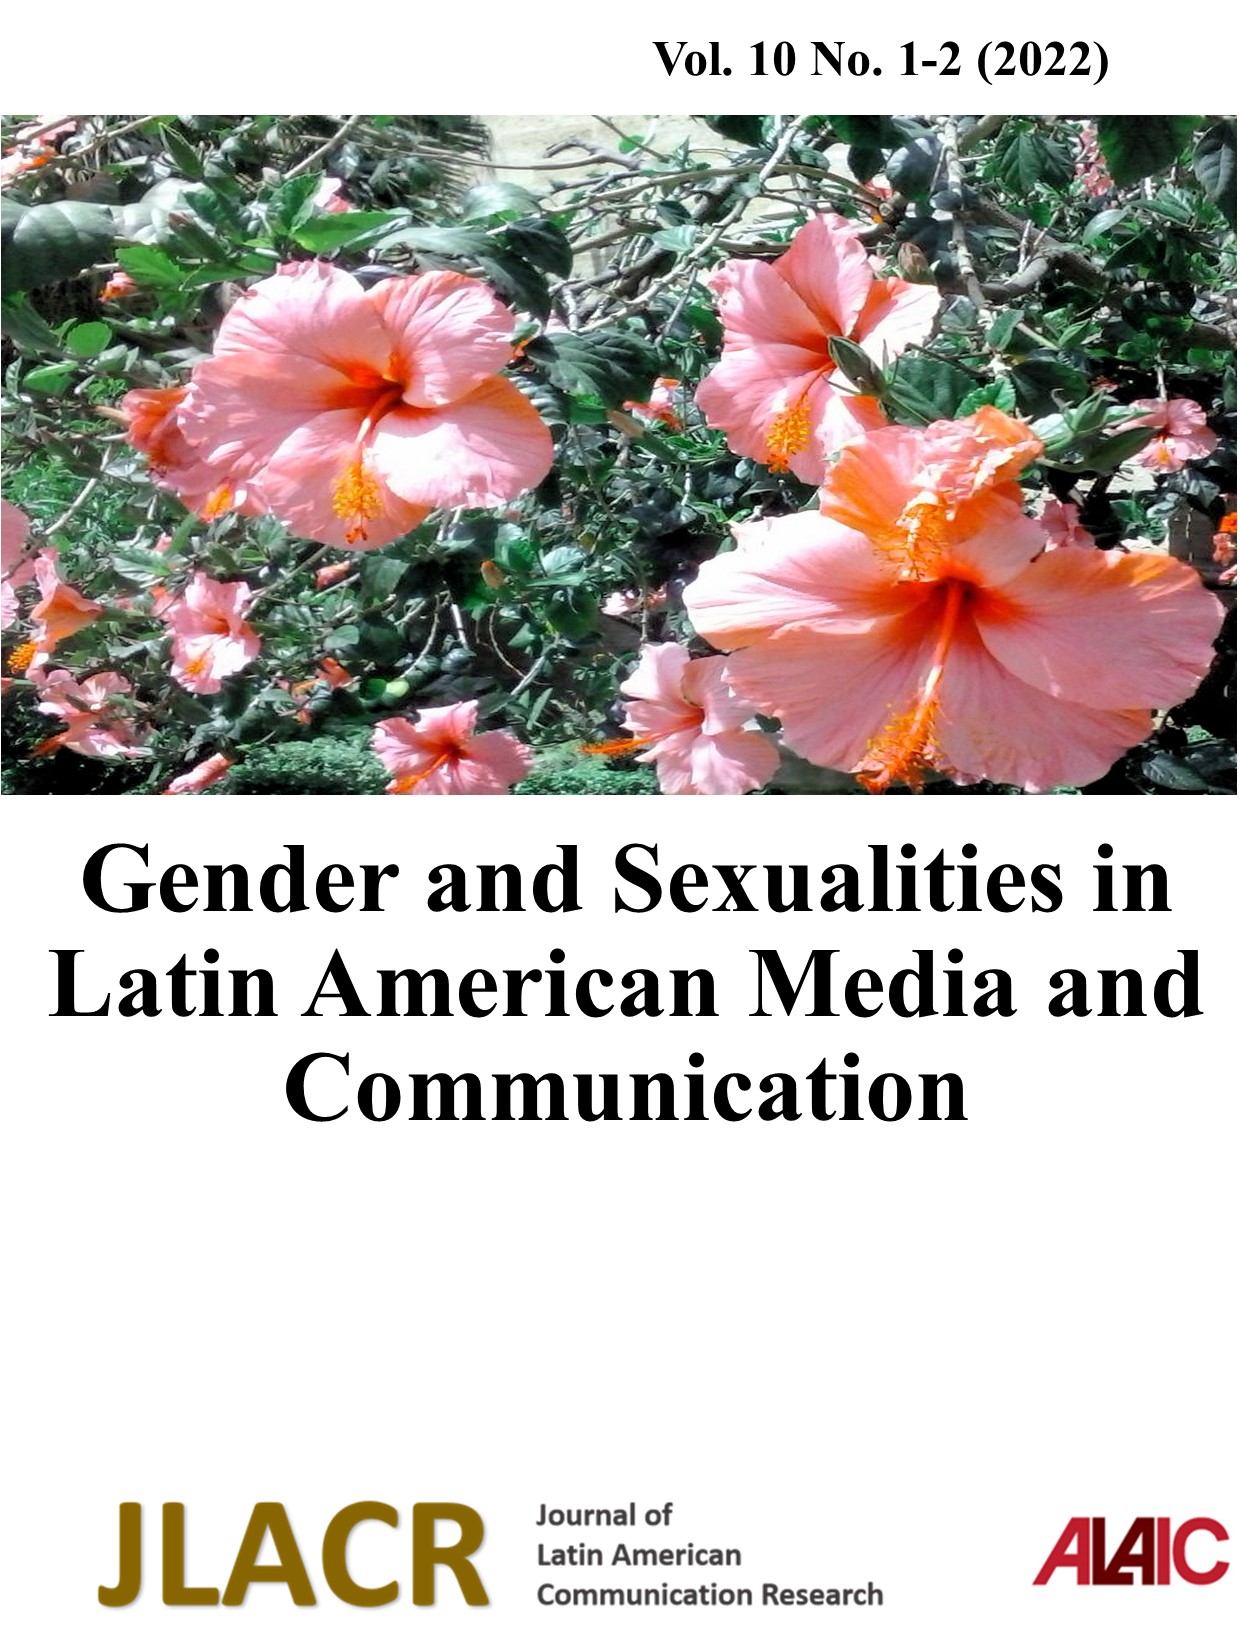 					Ver Vol. 10 Núm. 1-2 (2022): Gender and Sexualities in Latin American Media and Communication
				